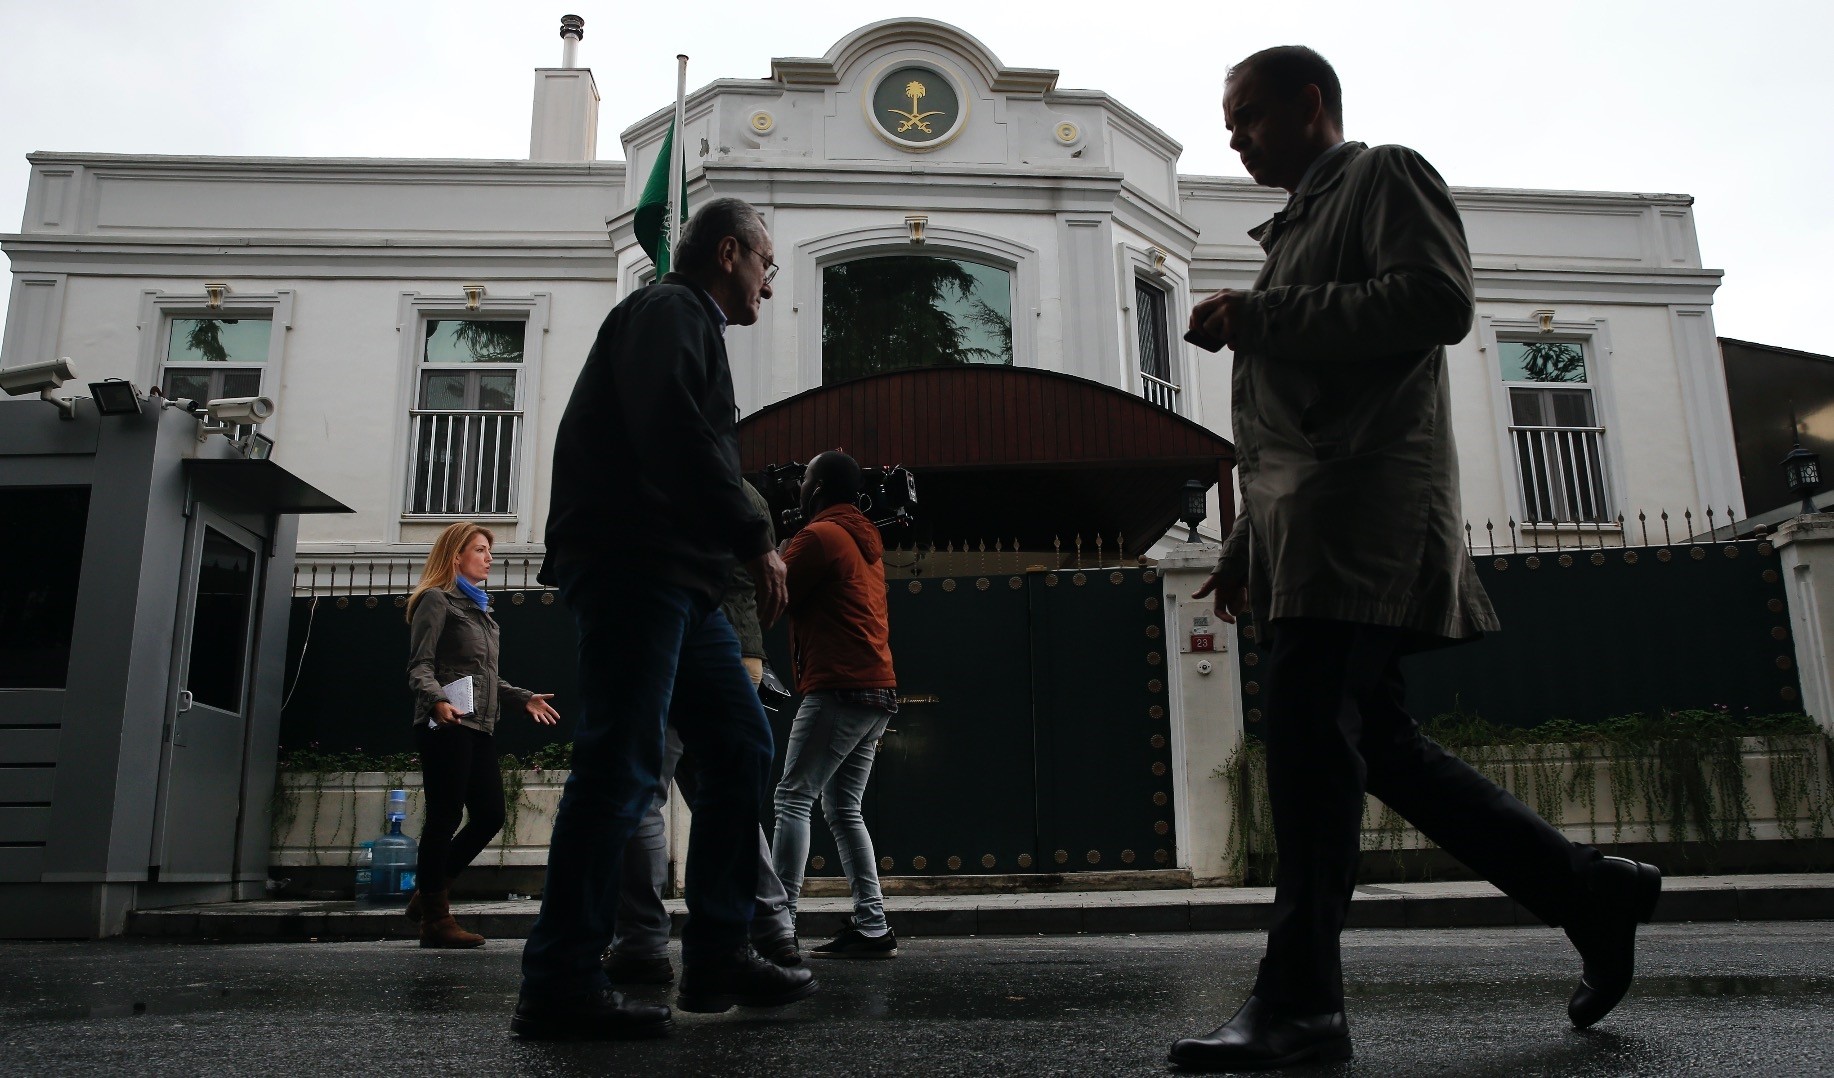 Pedestrians walk by as members of the media report from outside the consul general of Saudi Arabiau2019s residence in Istanbul, Oct. 18.